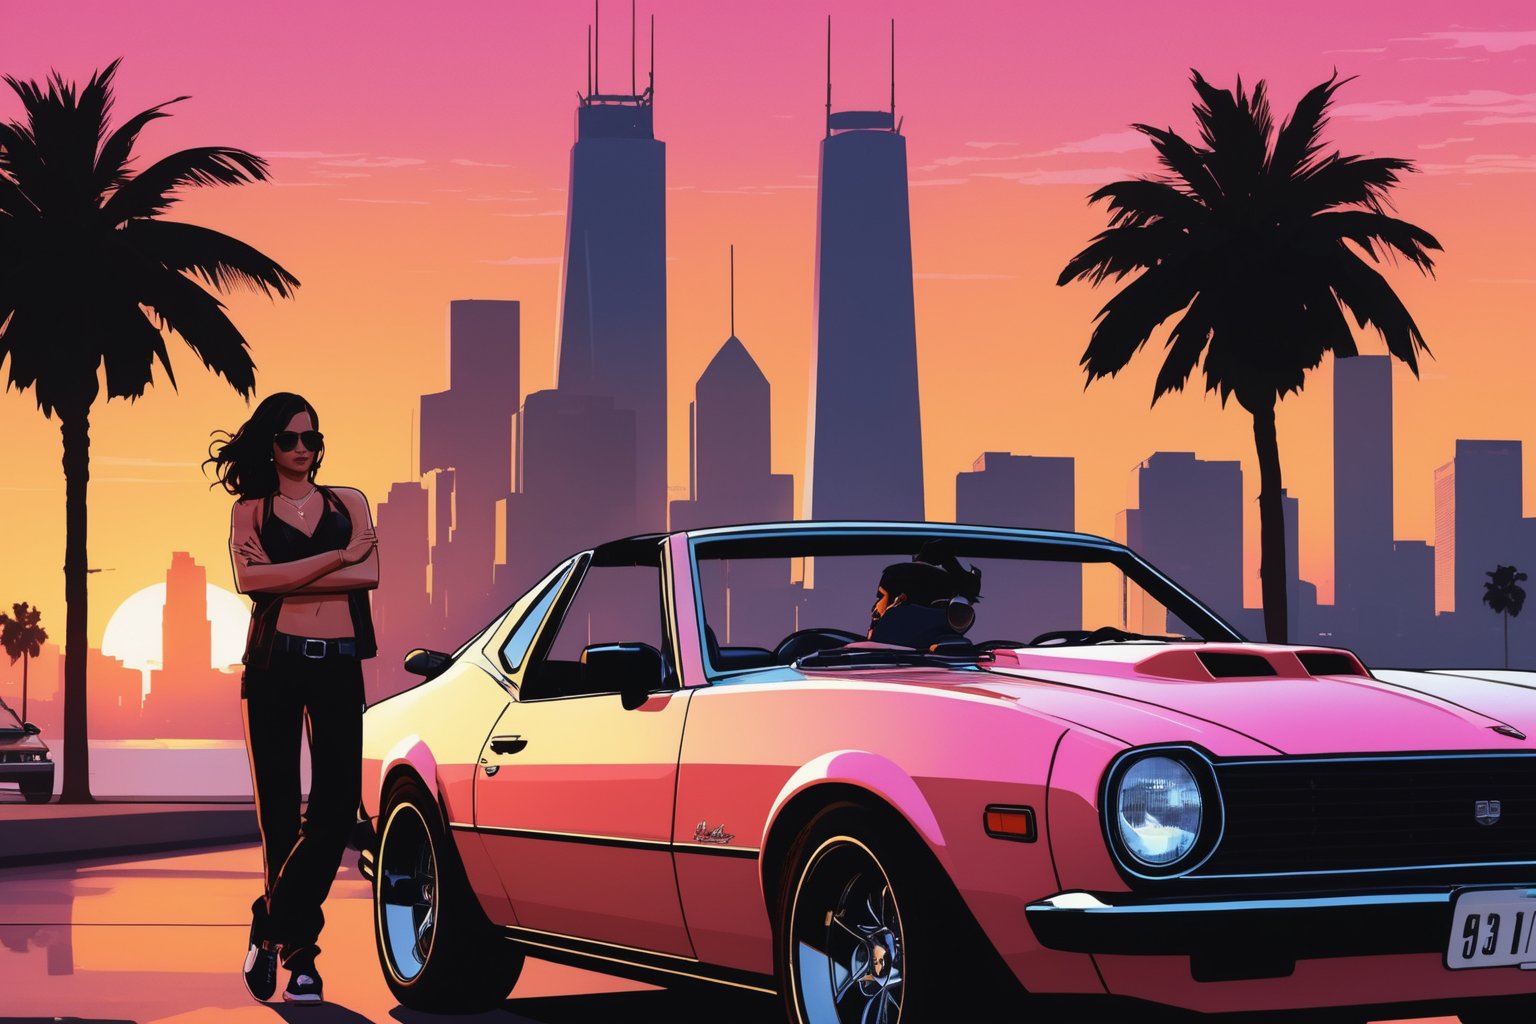 GTA (Grand Theft Auto) style image, a boy and a girl leaning on the hood of a sports car, with the background of a city inspired by Vice City, at sunset.